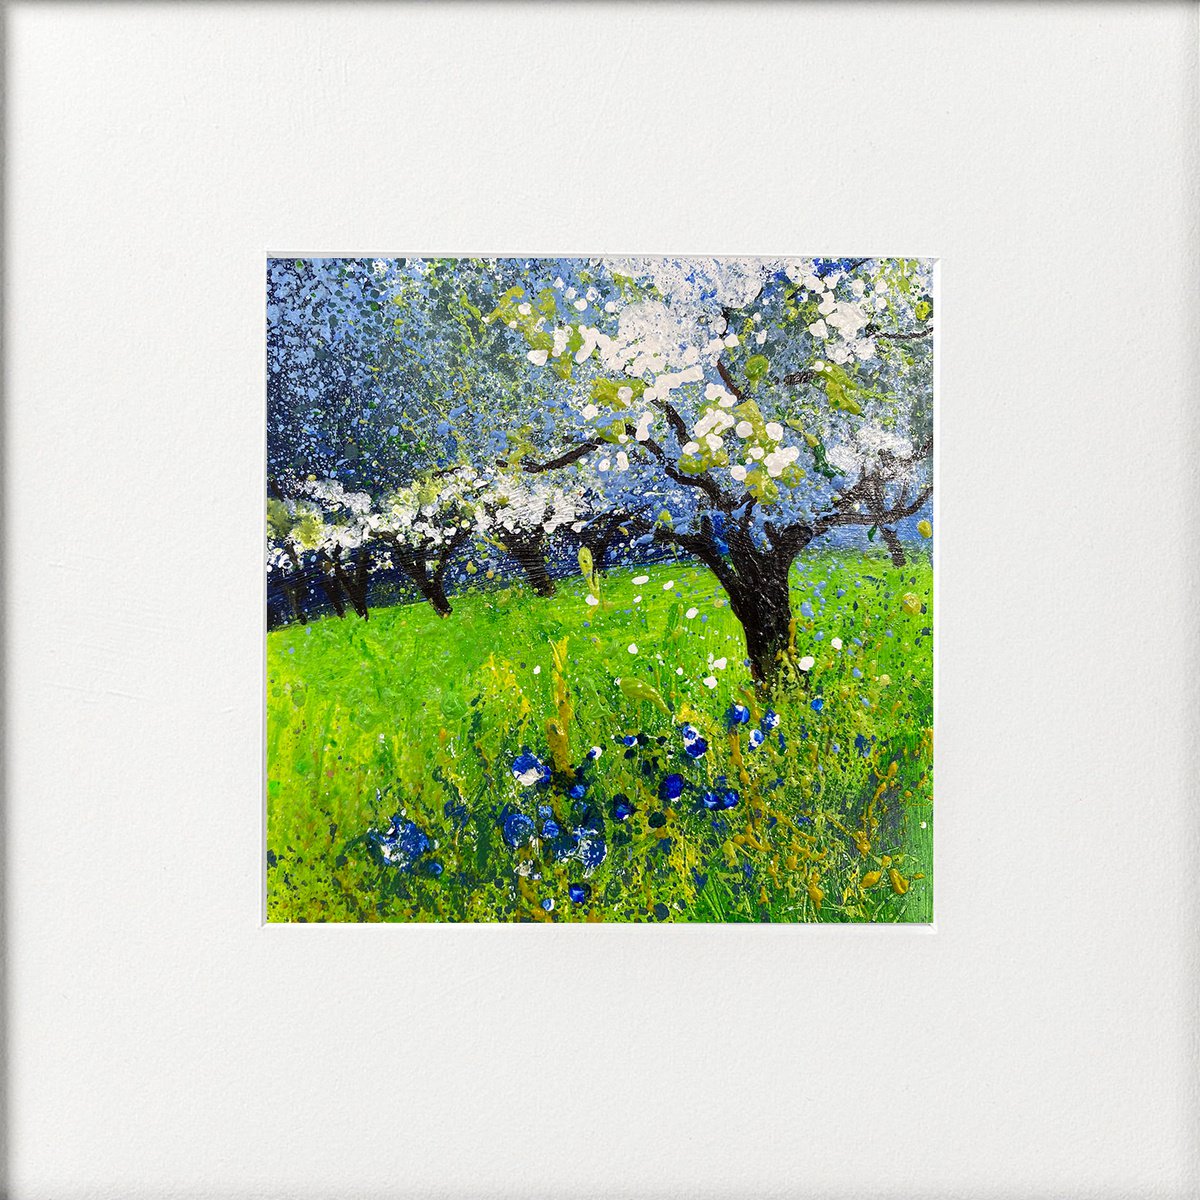 Orchard Series - Blue flowers in the grass by Teresa Tanner